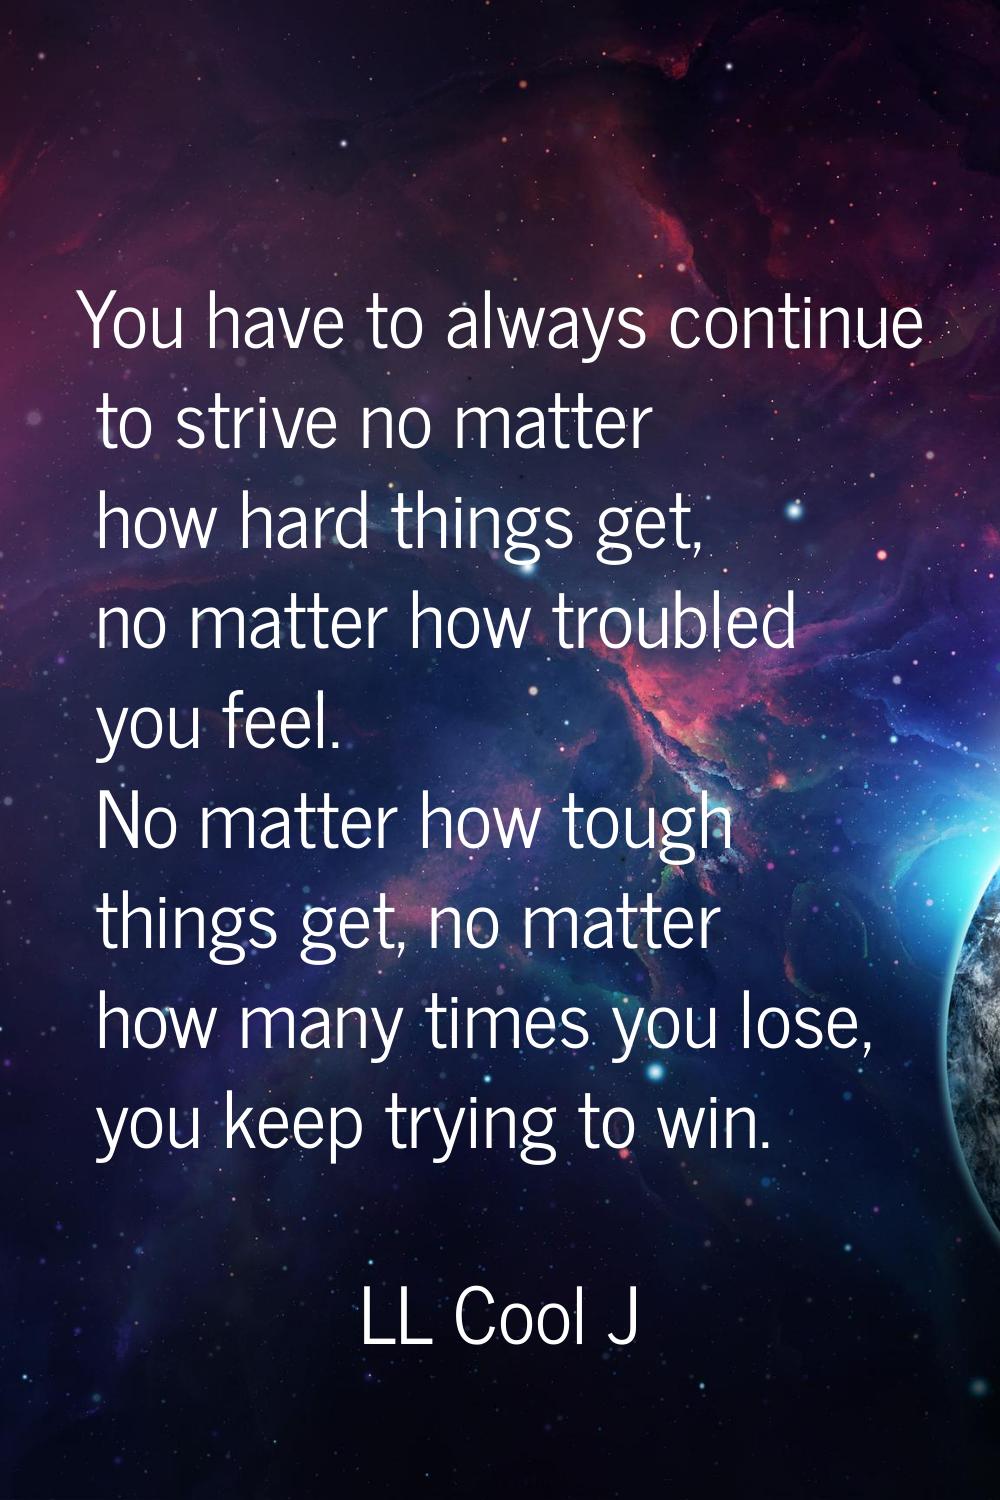 You have to always continue to strive no matter how hard things get, no matter how troubled you fee